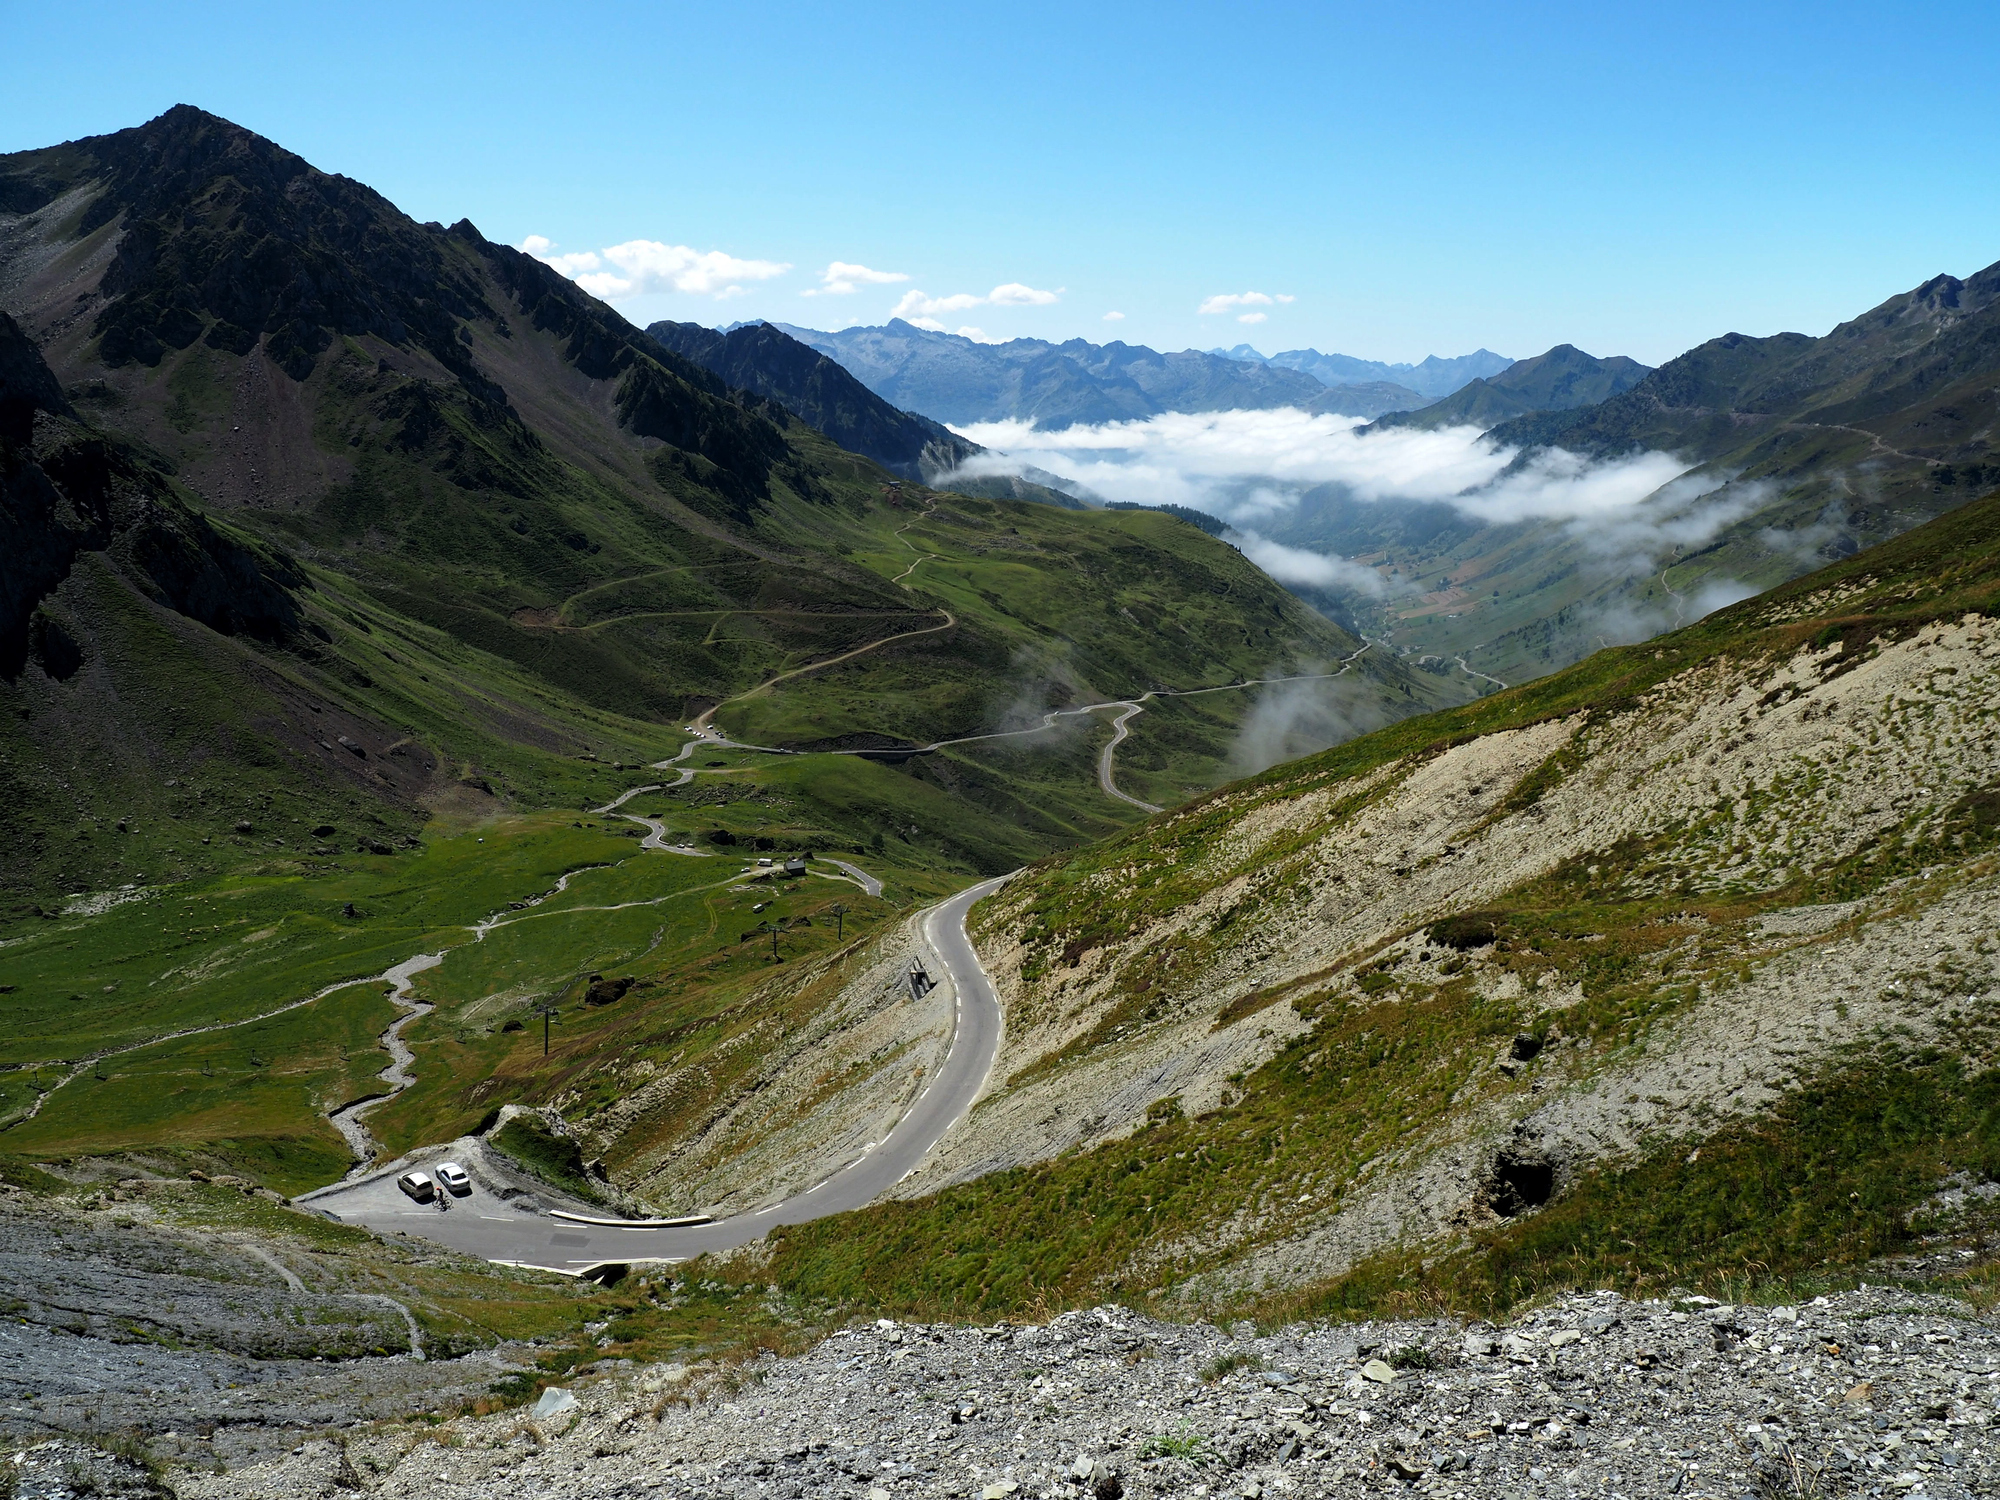 Shot of montane landscapes with narrow roads in Col du Tourmalet in Bagnerese-de-Bigorre, France